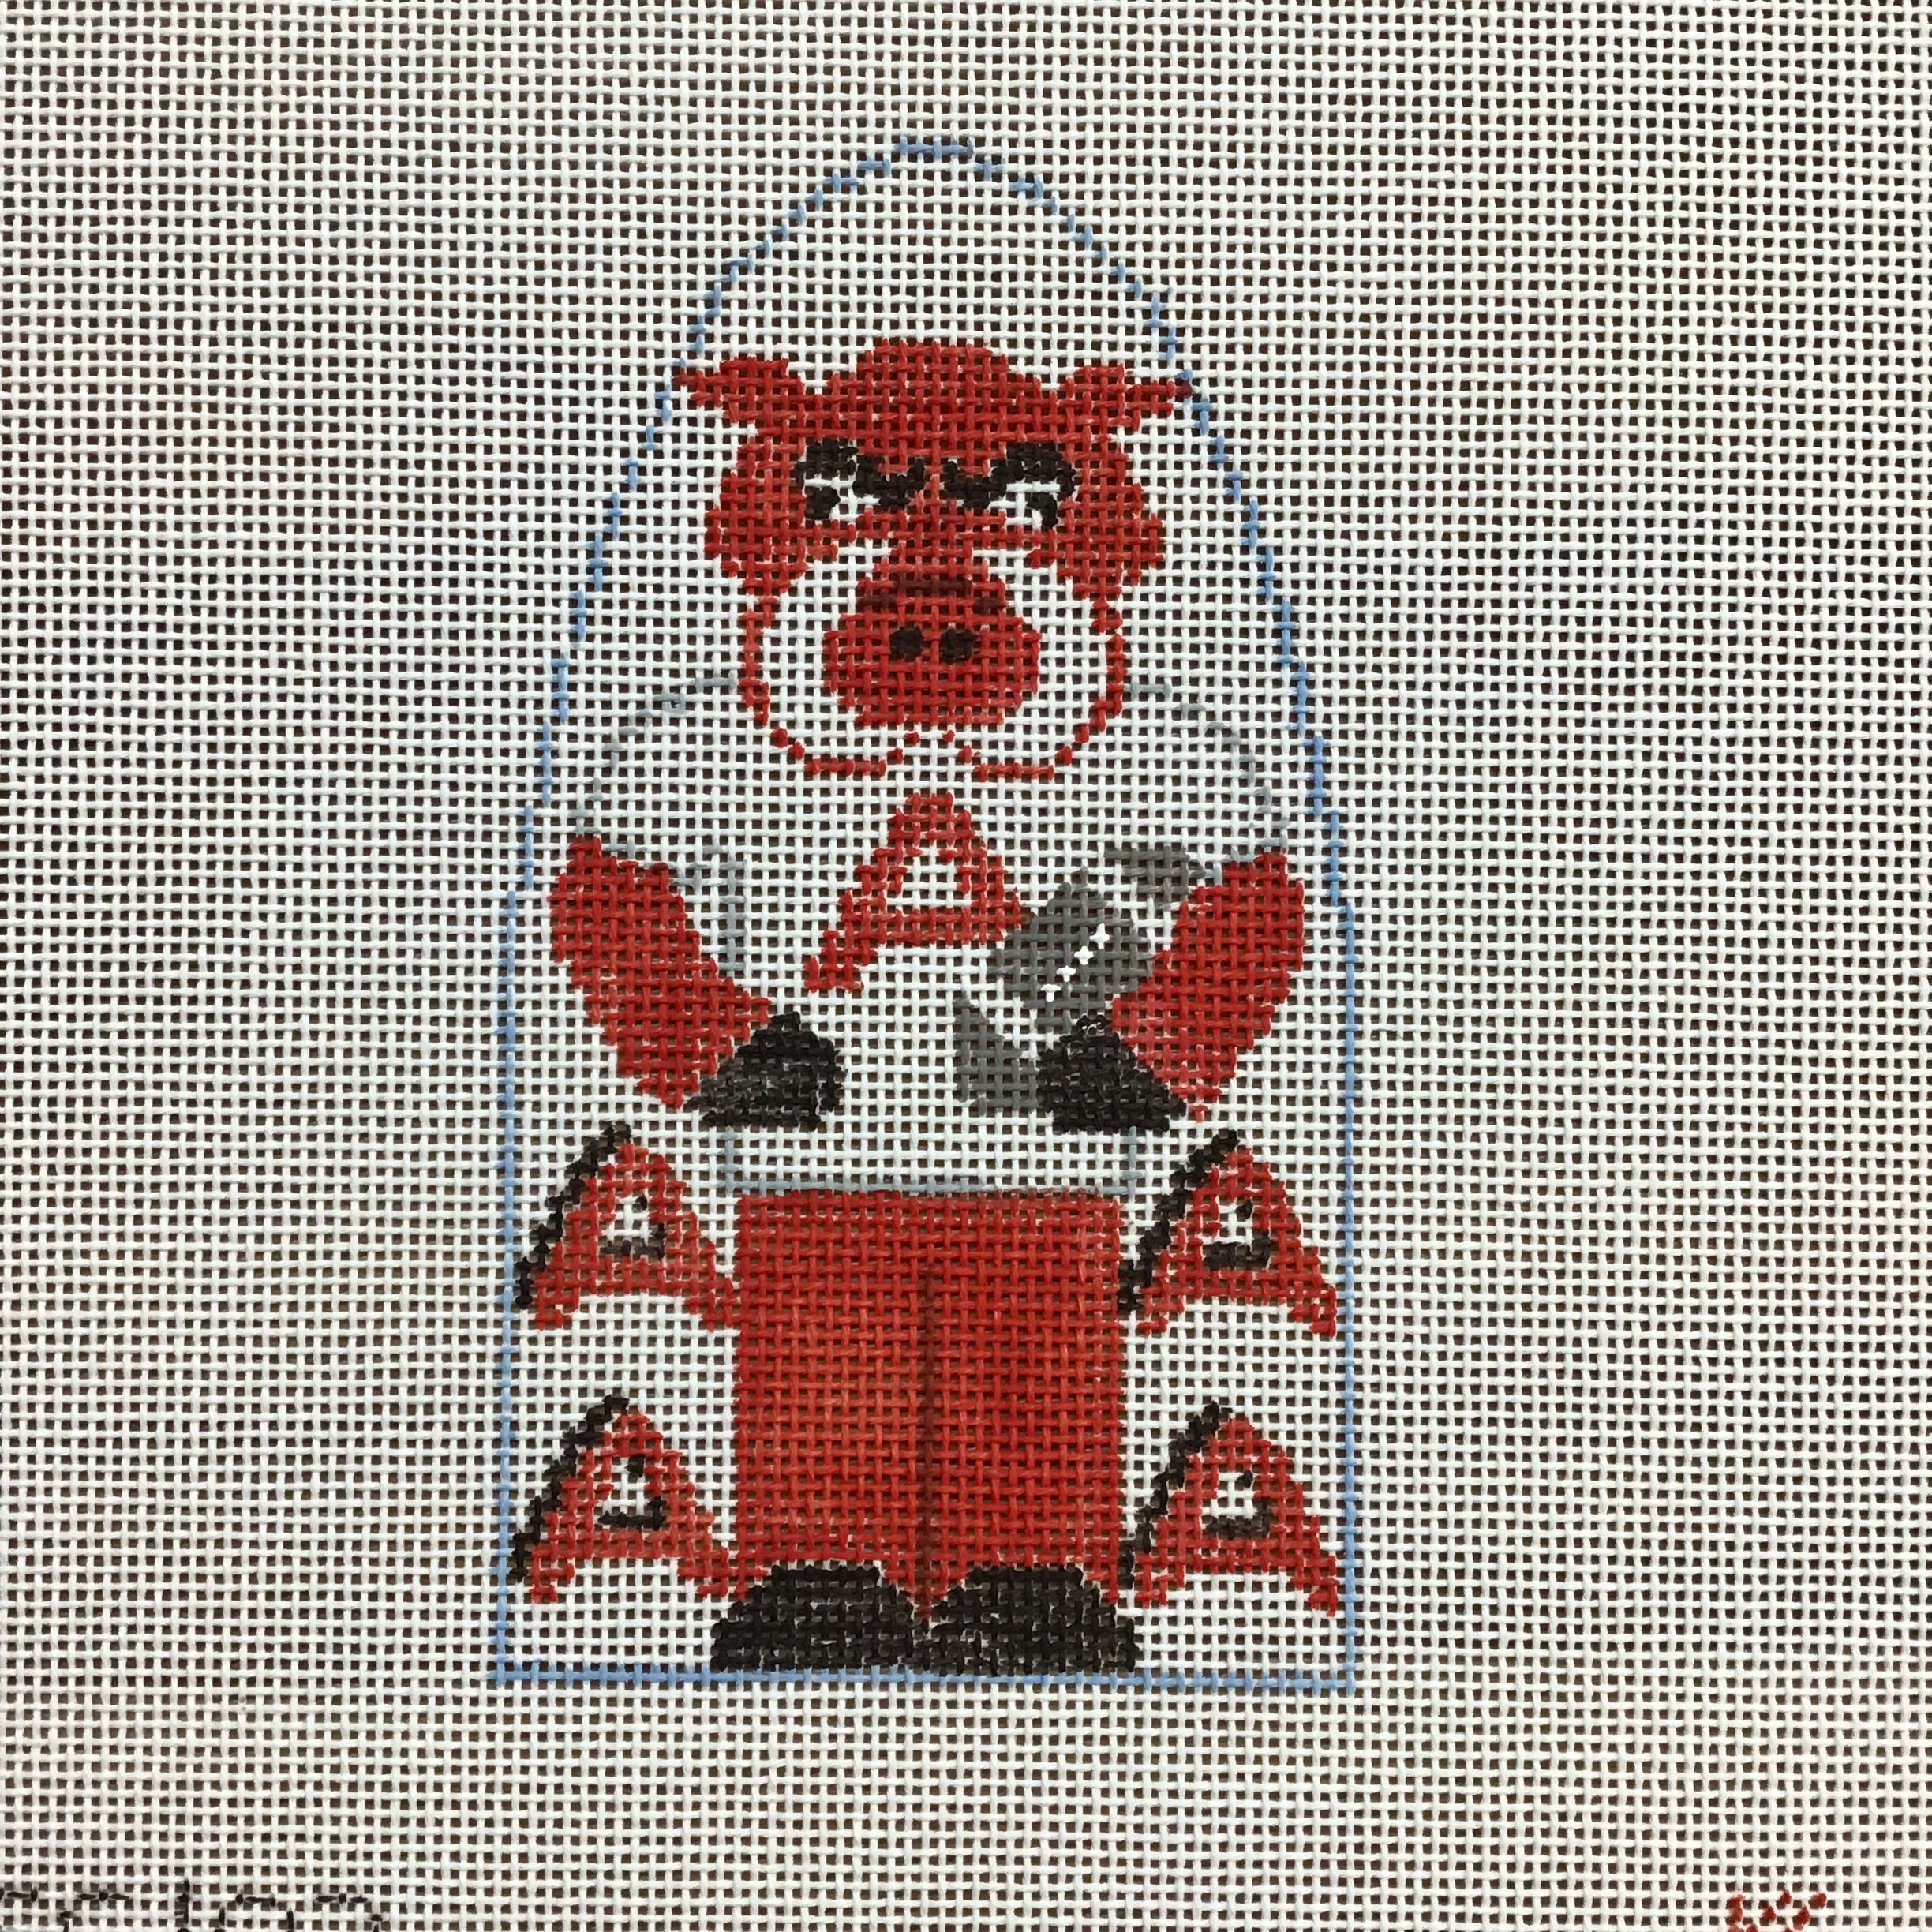 Pig Christmas Ornaments- Plastic Canvas Pattern or Kit